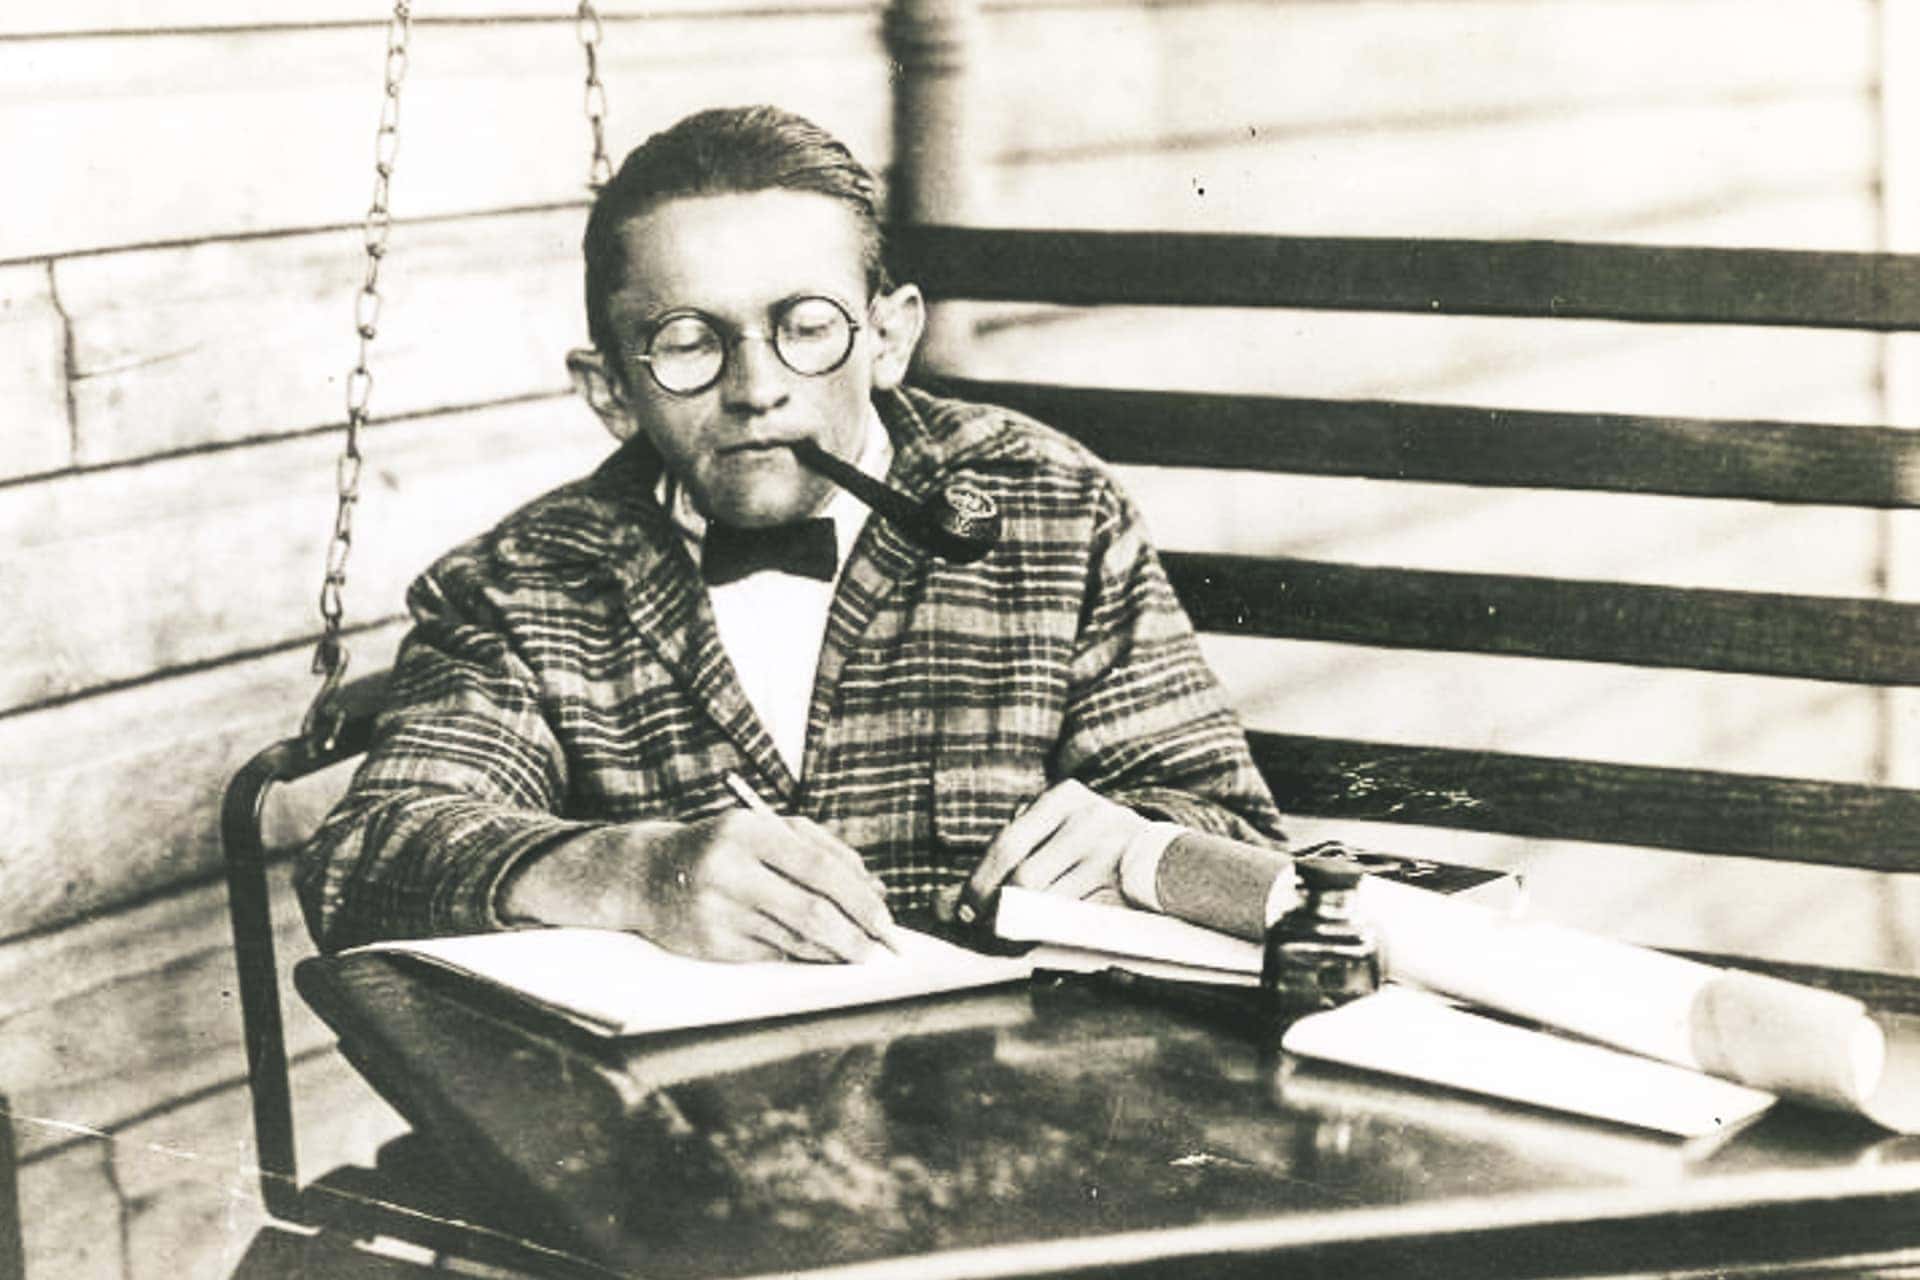 Karl Myers (1899 - 1951) from Tucker County, appointed as the first 'West Virginia's Poet Laureate' in 1927.